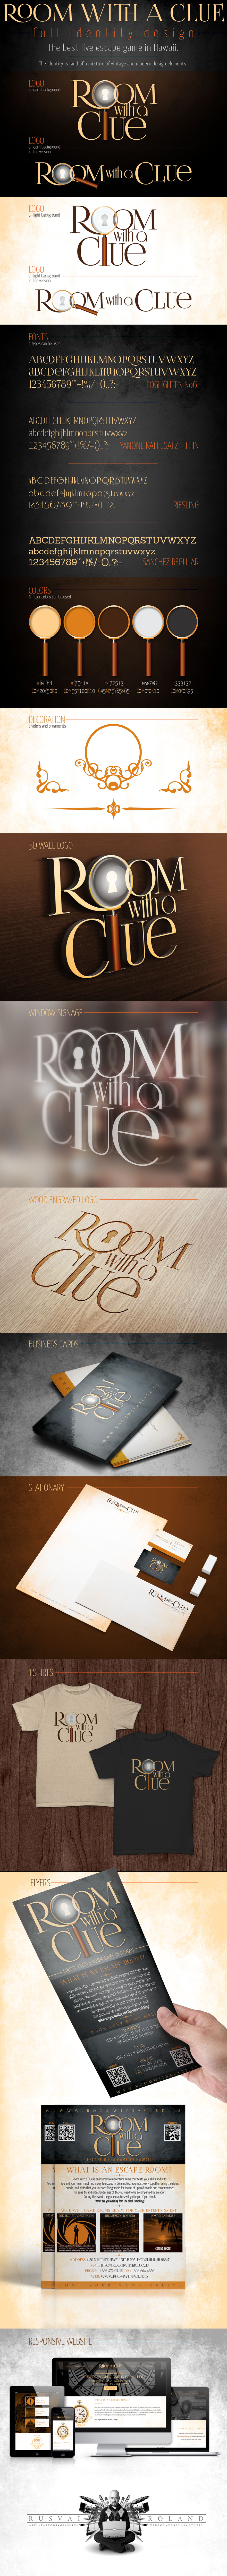 room with a clue full identity branding